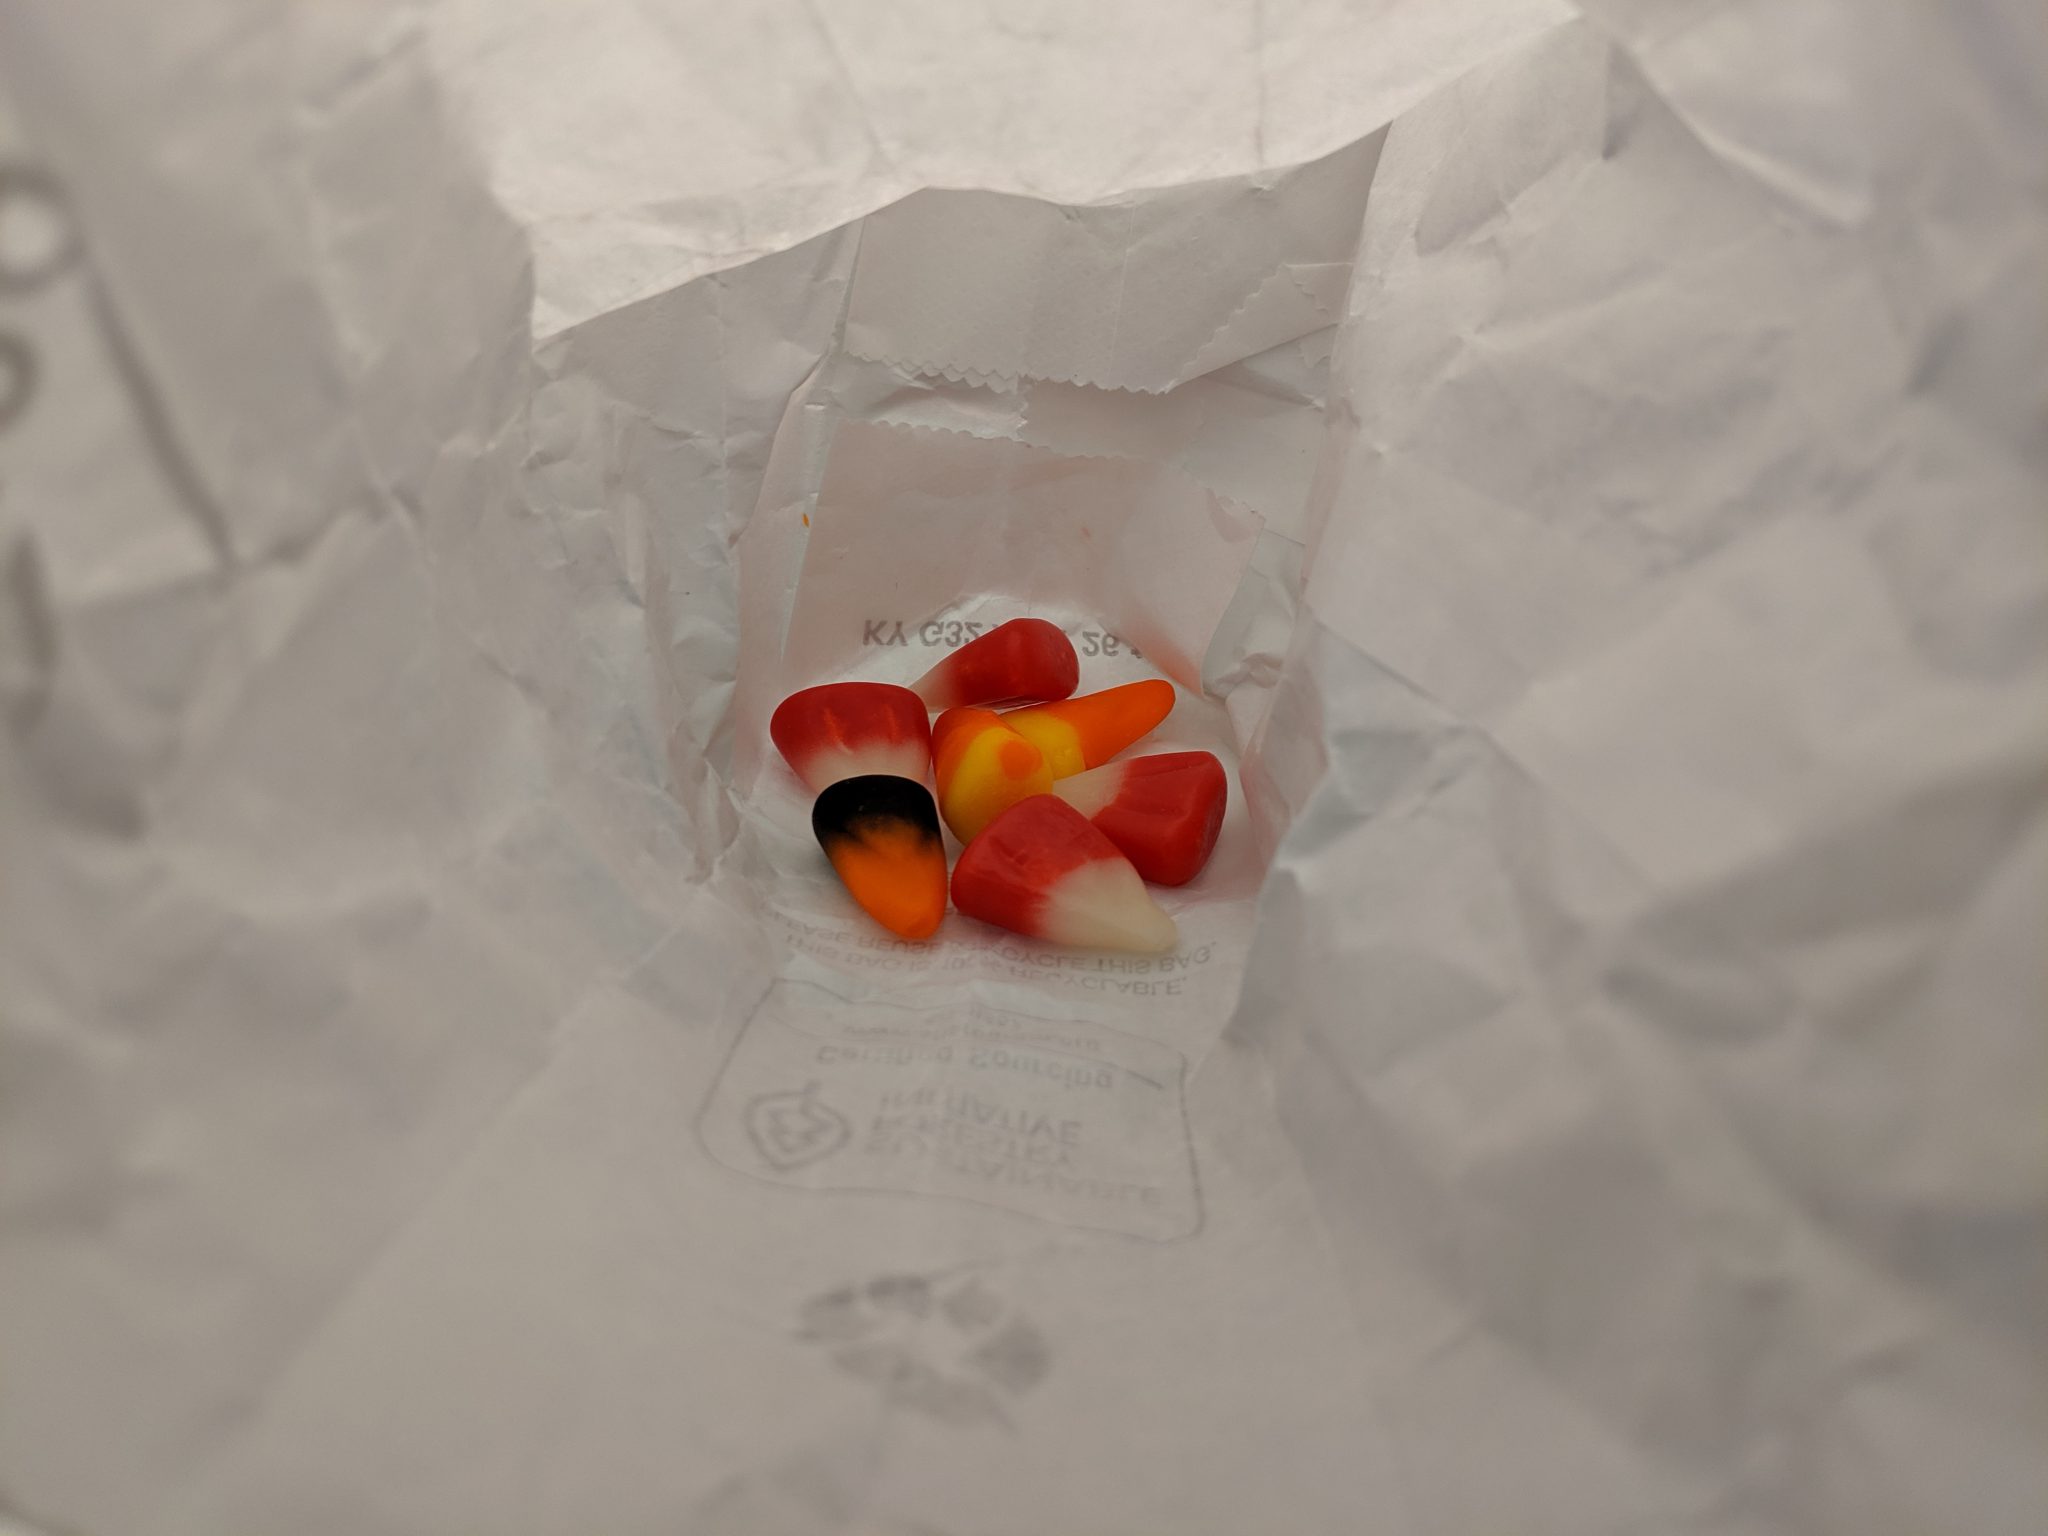 Candy in the bottom of a bag